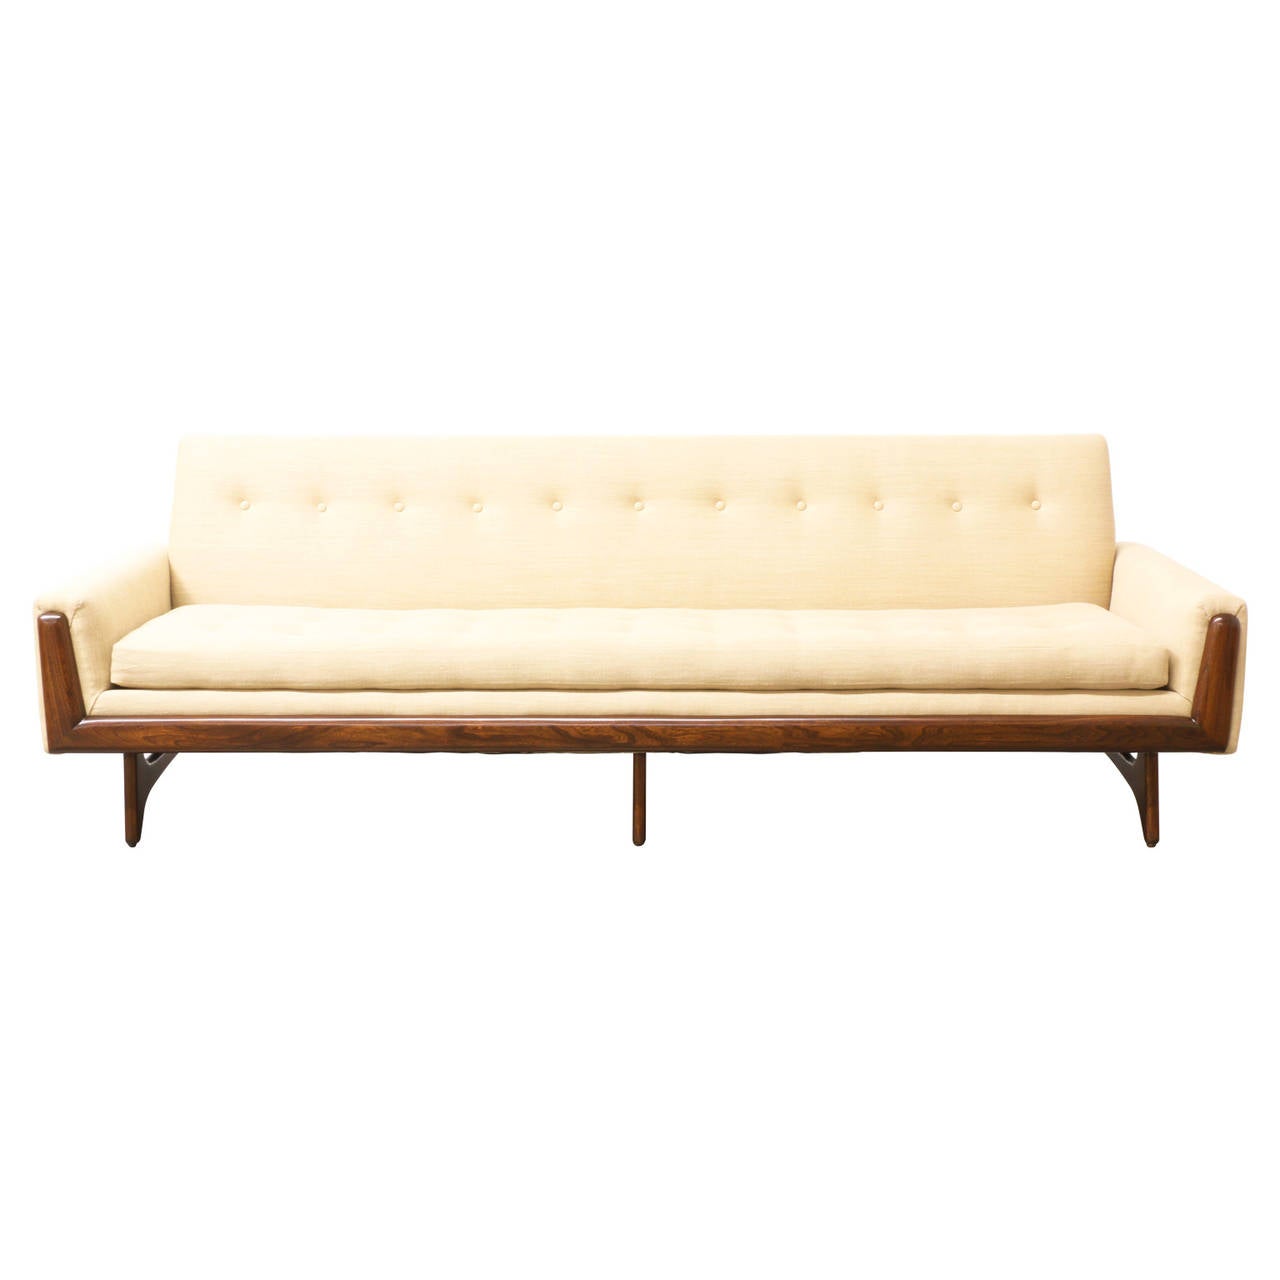 Designer: Adrian Pearsall
Manufacturer: Craft Associates
Period/Style: Mid Century Modern
Country: United States
Date: 1960’s

Dimensions: 28.75″H x 93.5″L x 31.5″W
Seat Height 17.25″
Materials: Walnut
Condition: Excellent – Newly